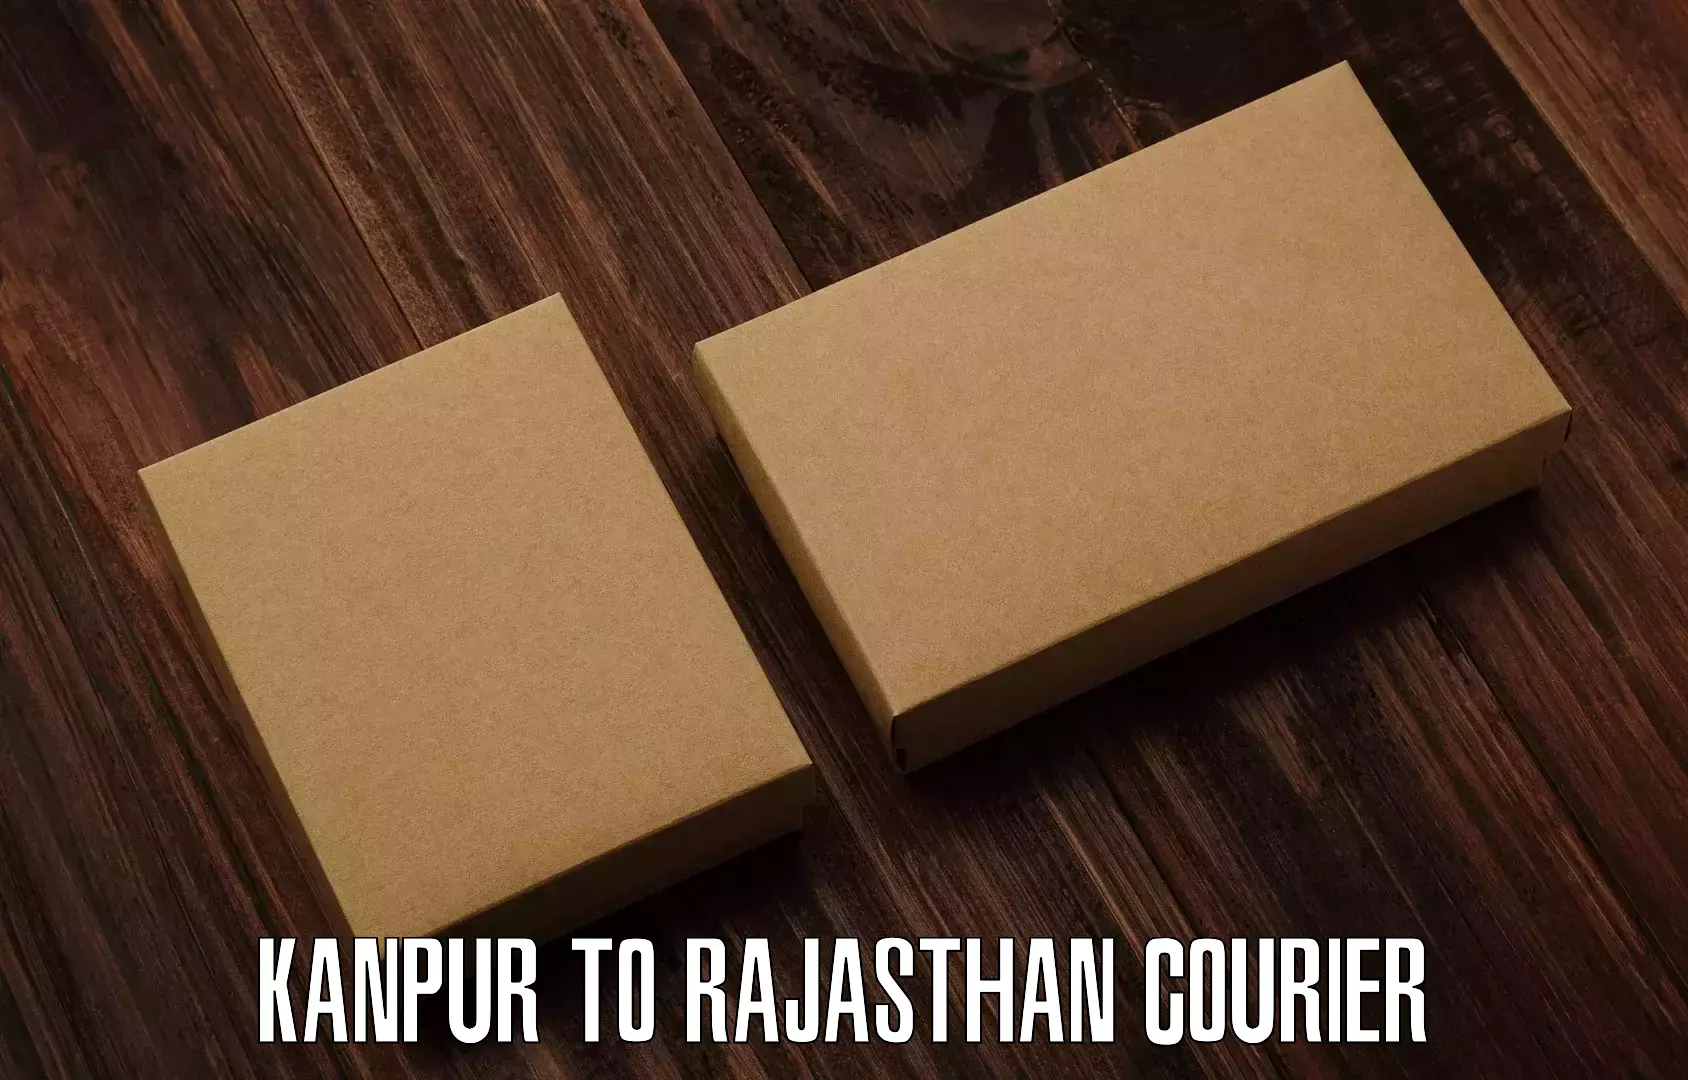 Optimized delivery routes Kanpur to Fatehpur Sikar